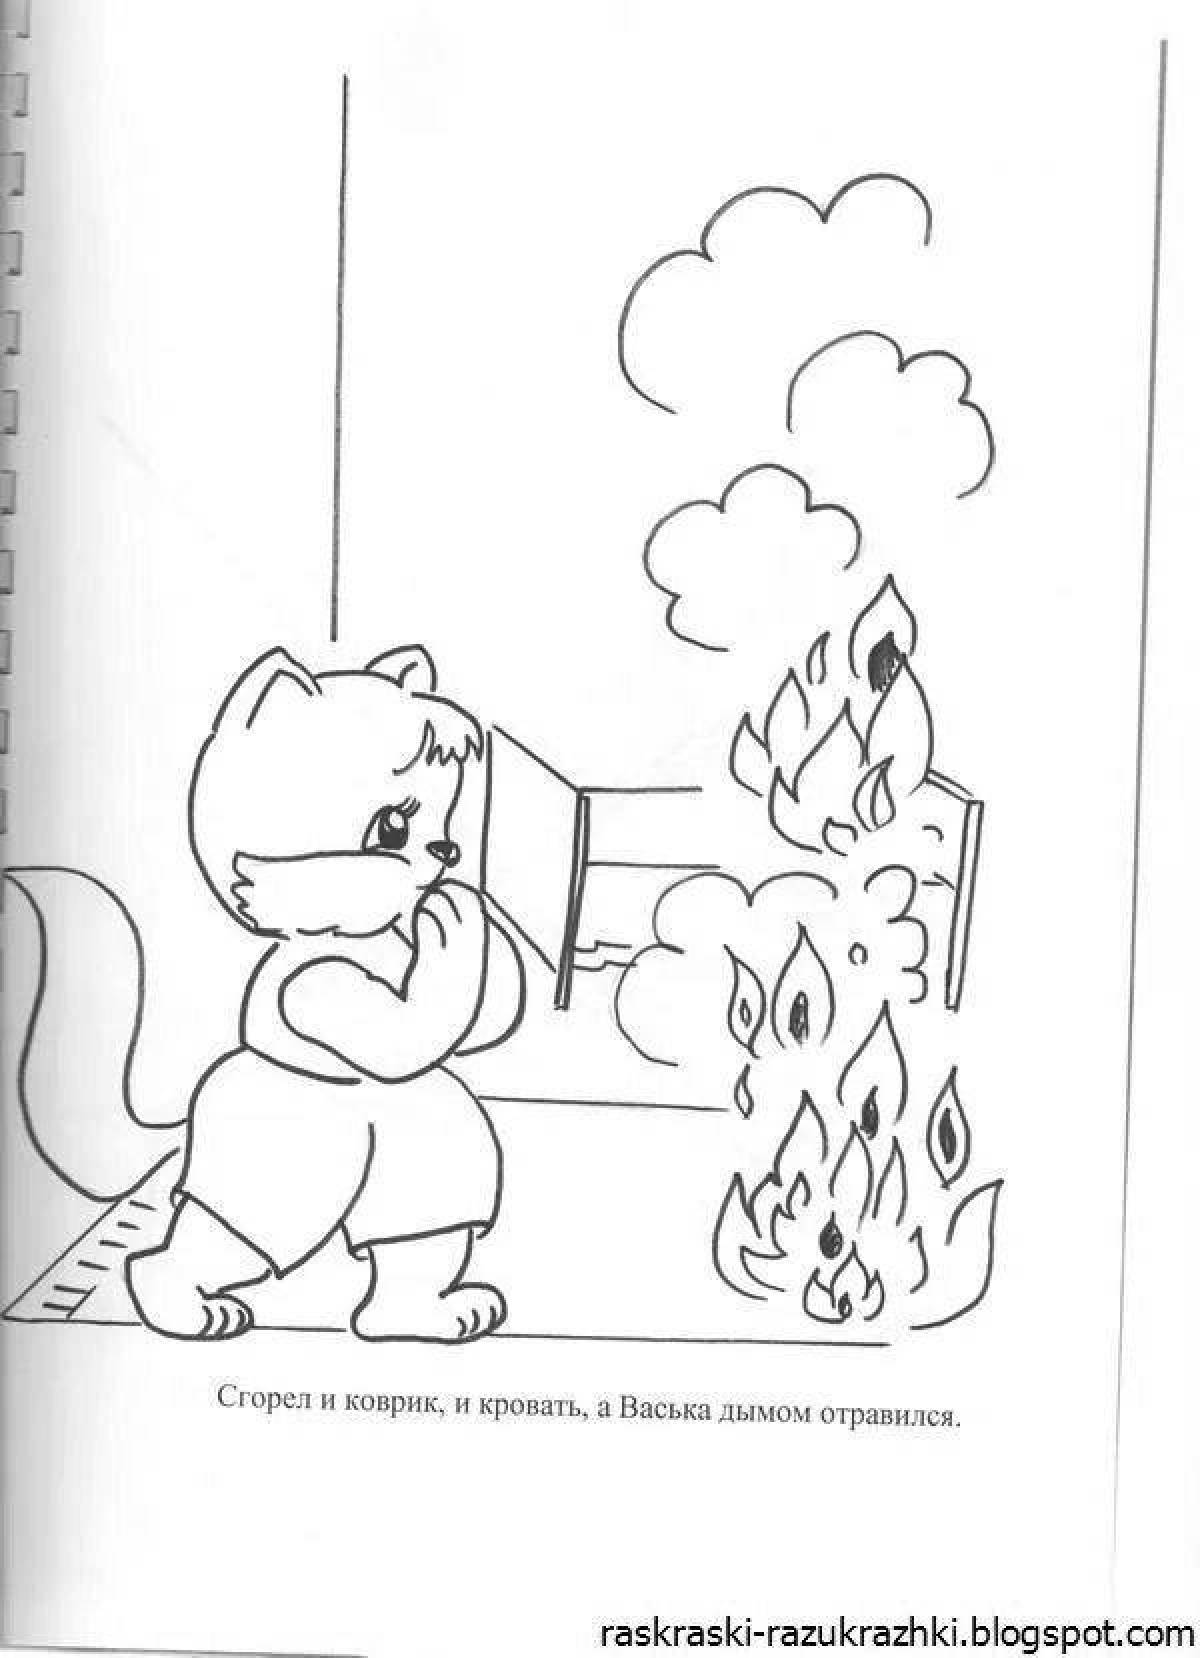 Child Safety Gorgeous Coloring Book